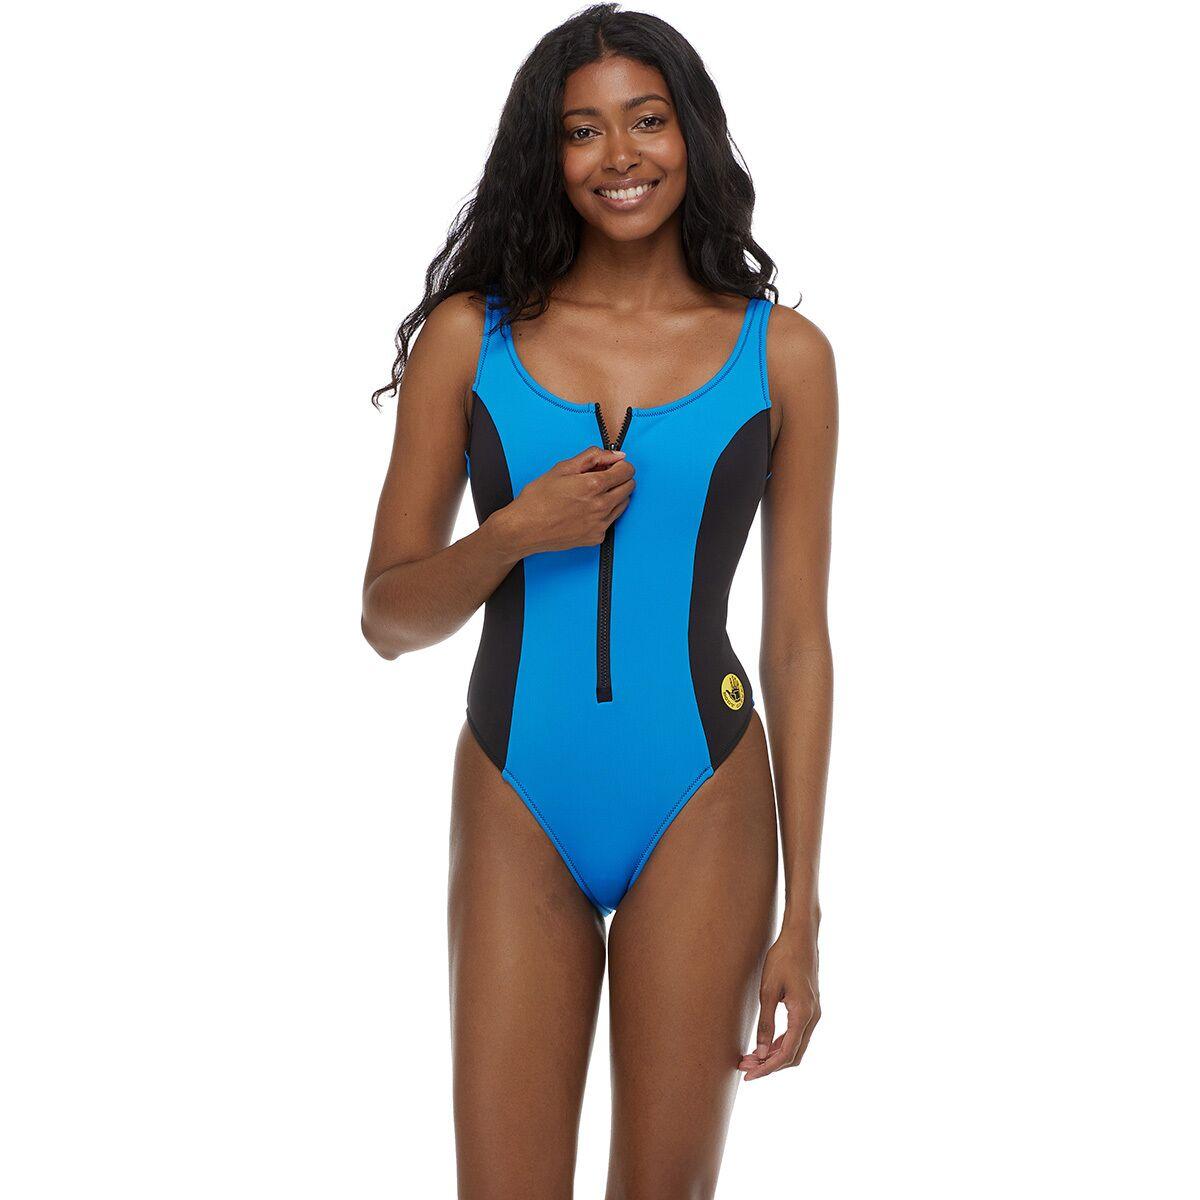 https://cdna.lystit.com/photos/backcountry/fd0bffc9/body-glove-Royal-80s-Throwback-Time-After-Time-One-piece-Swimsuit.jpeg